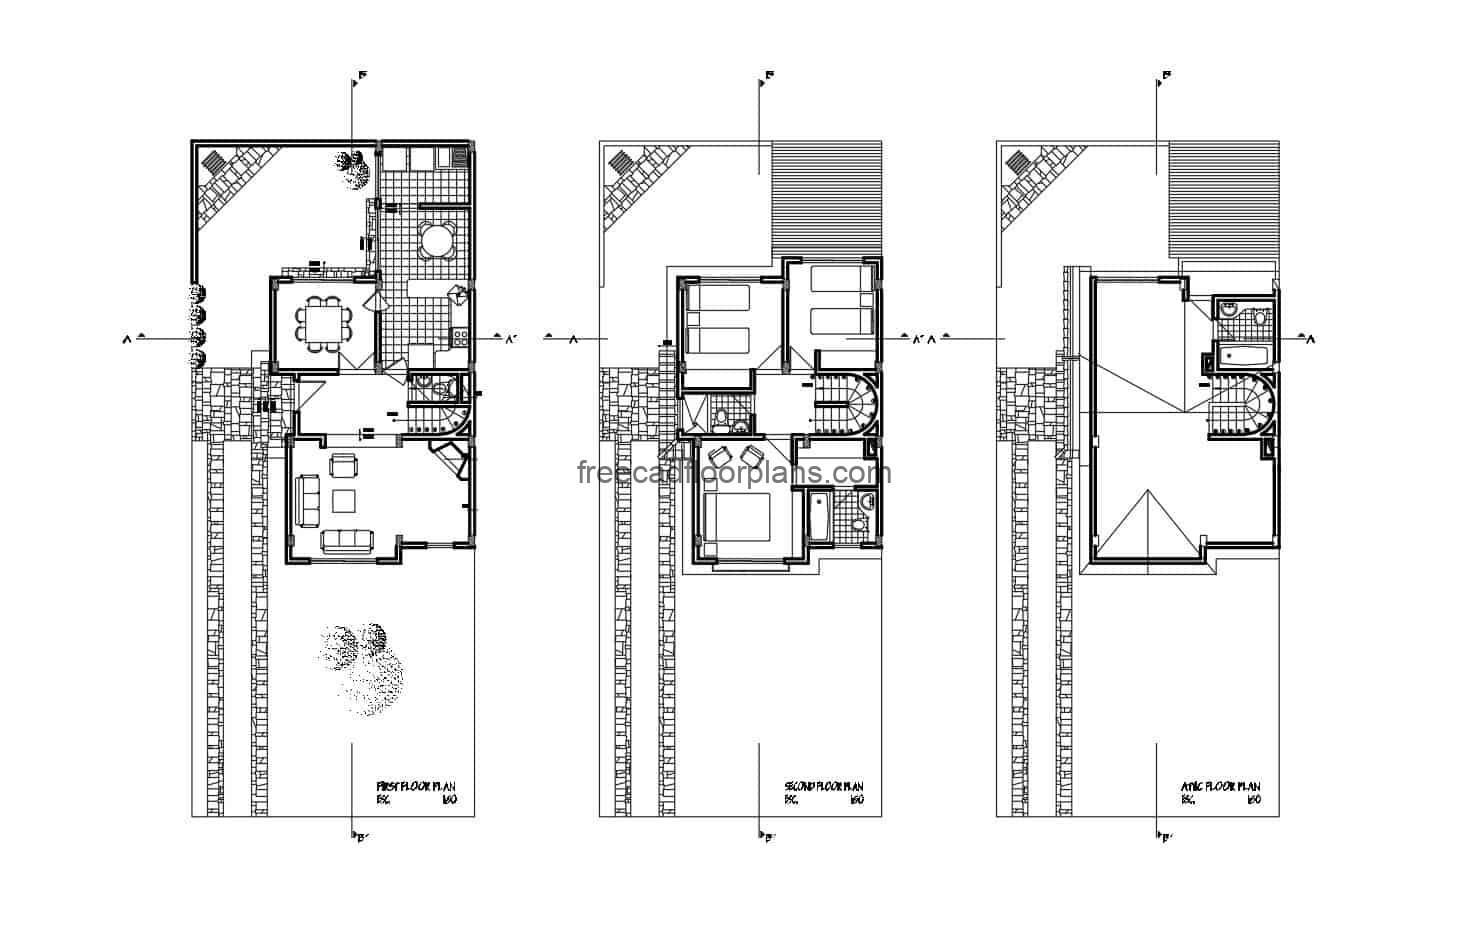 Complete architectural design of Two story house with attic with pitched roofs, internal layout cad blocks DWG